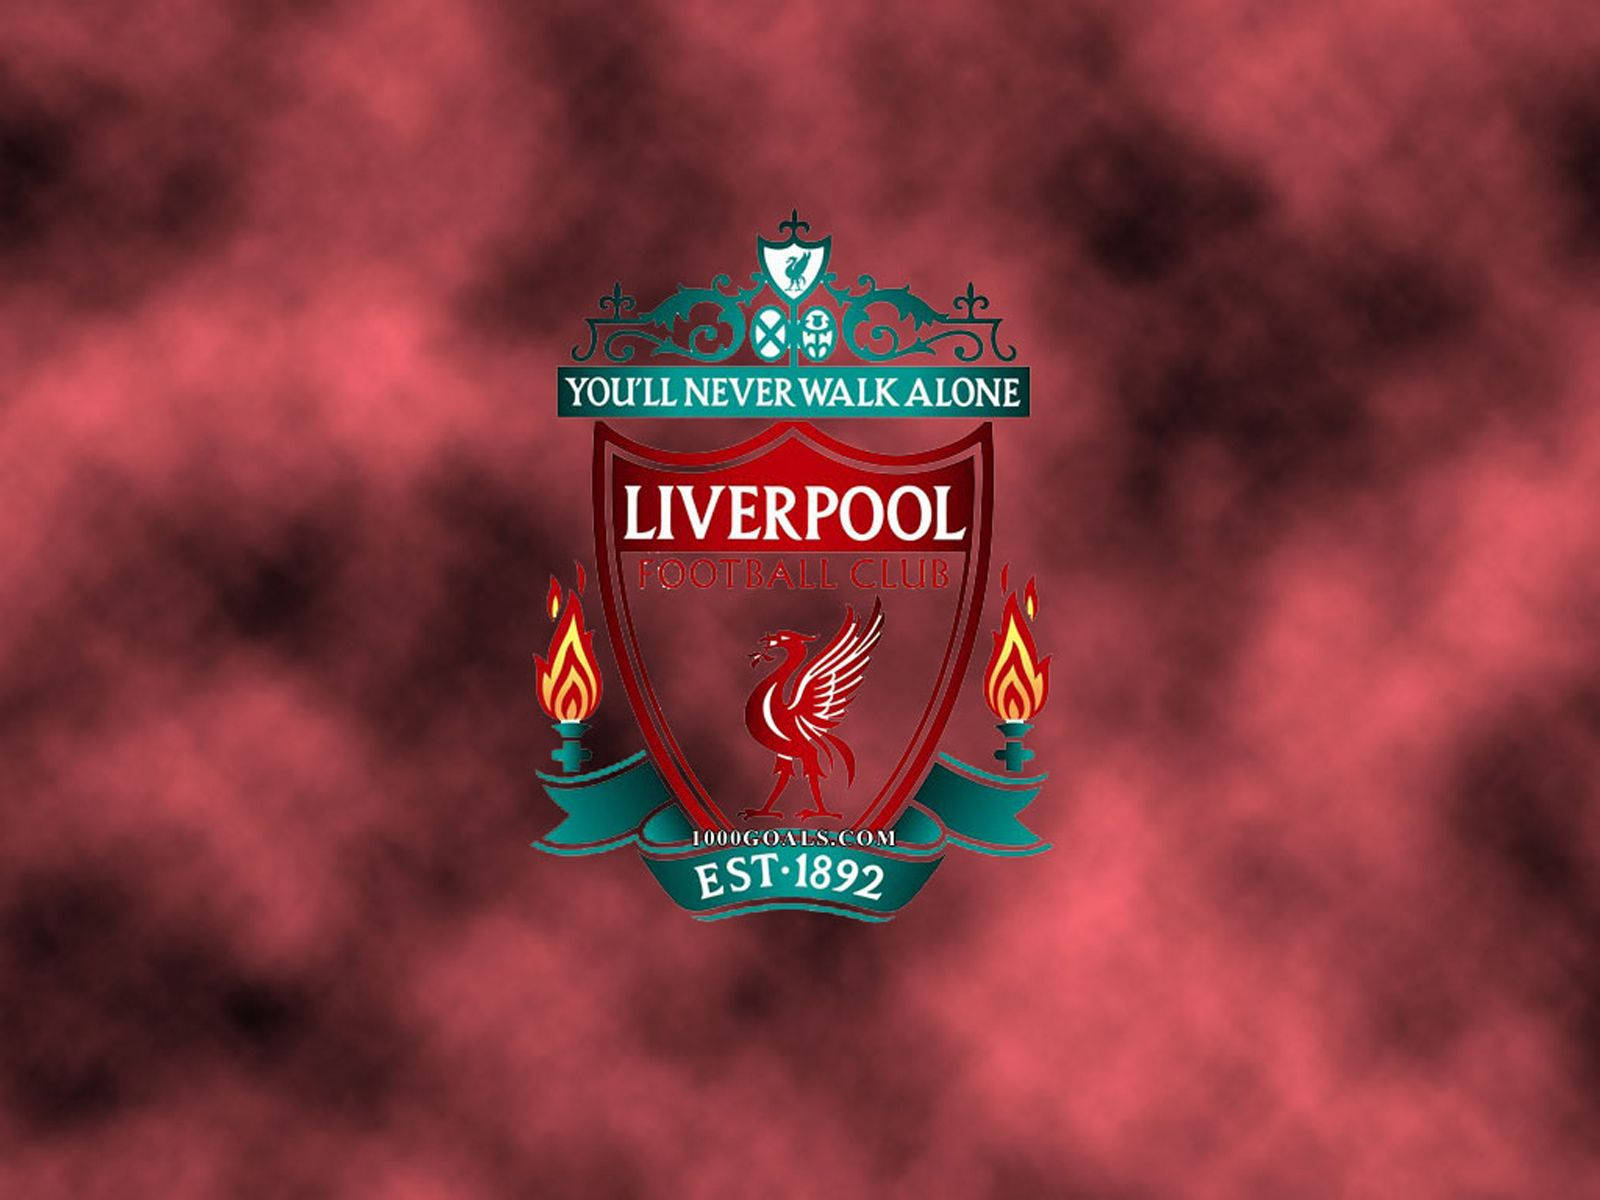 Fly The Red Flag High - Liverpool Fc Logo